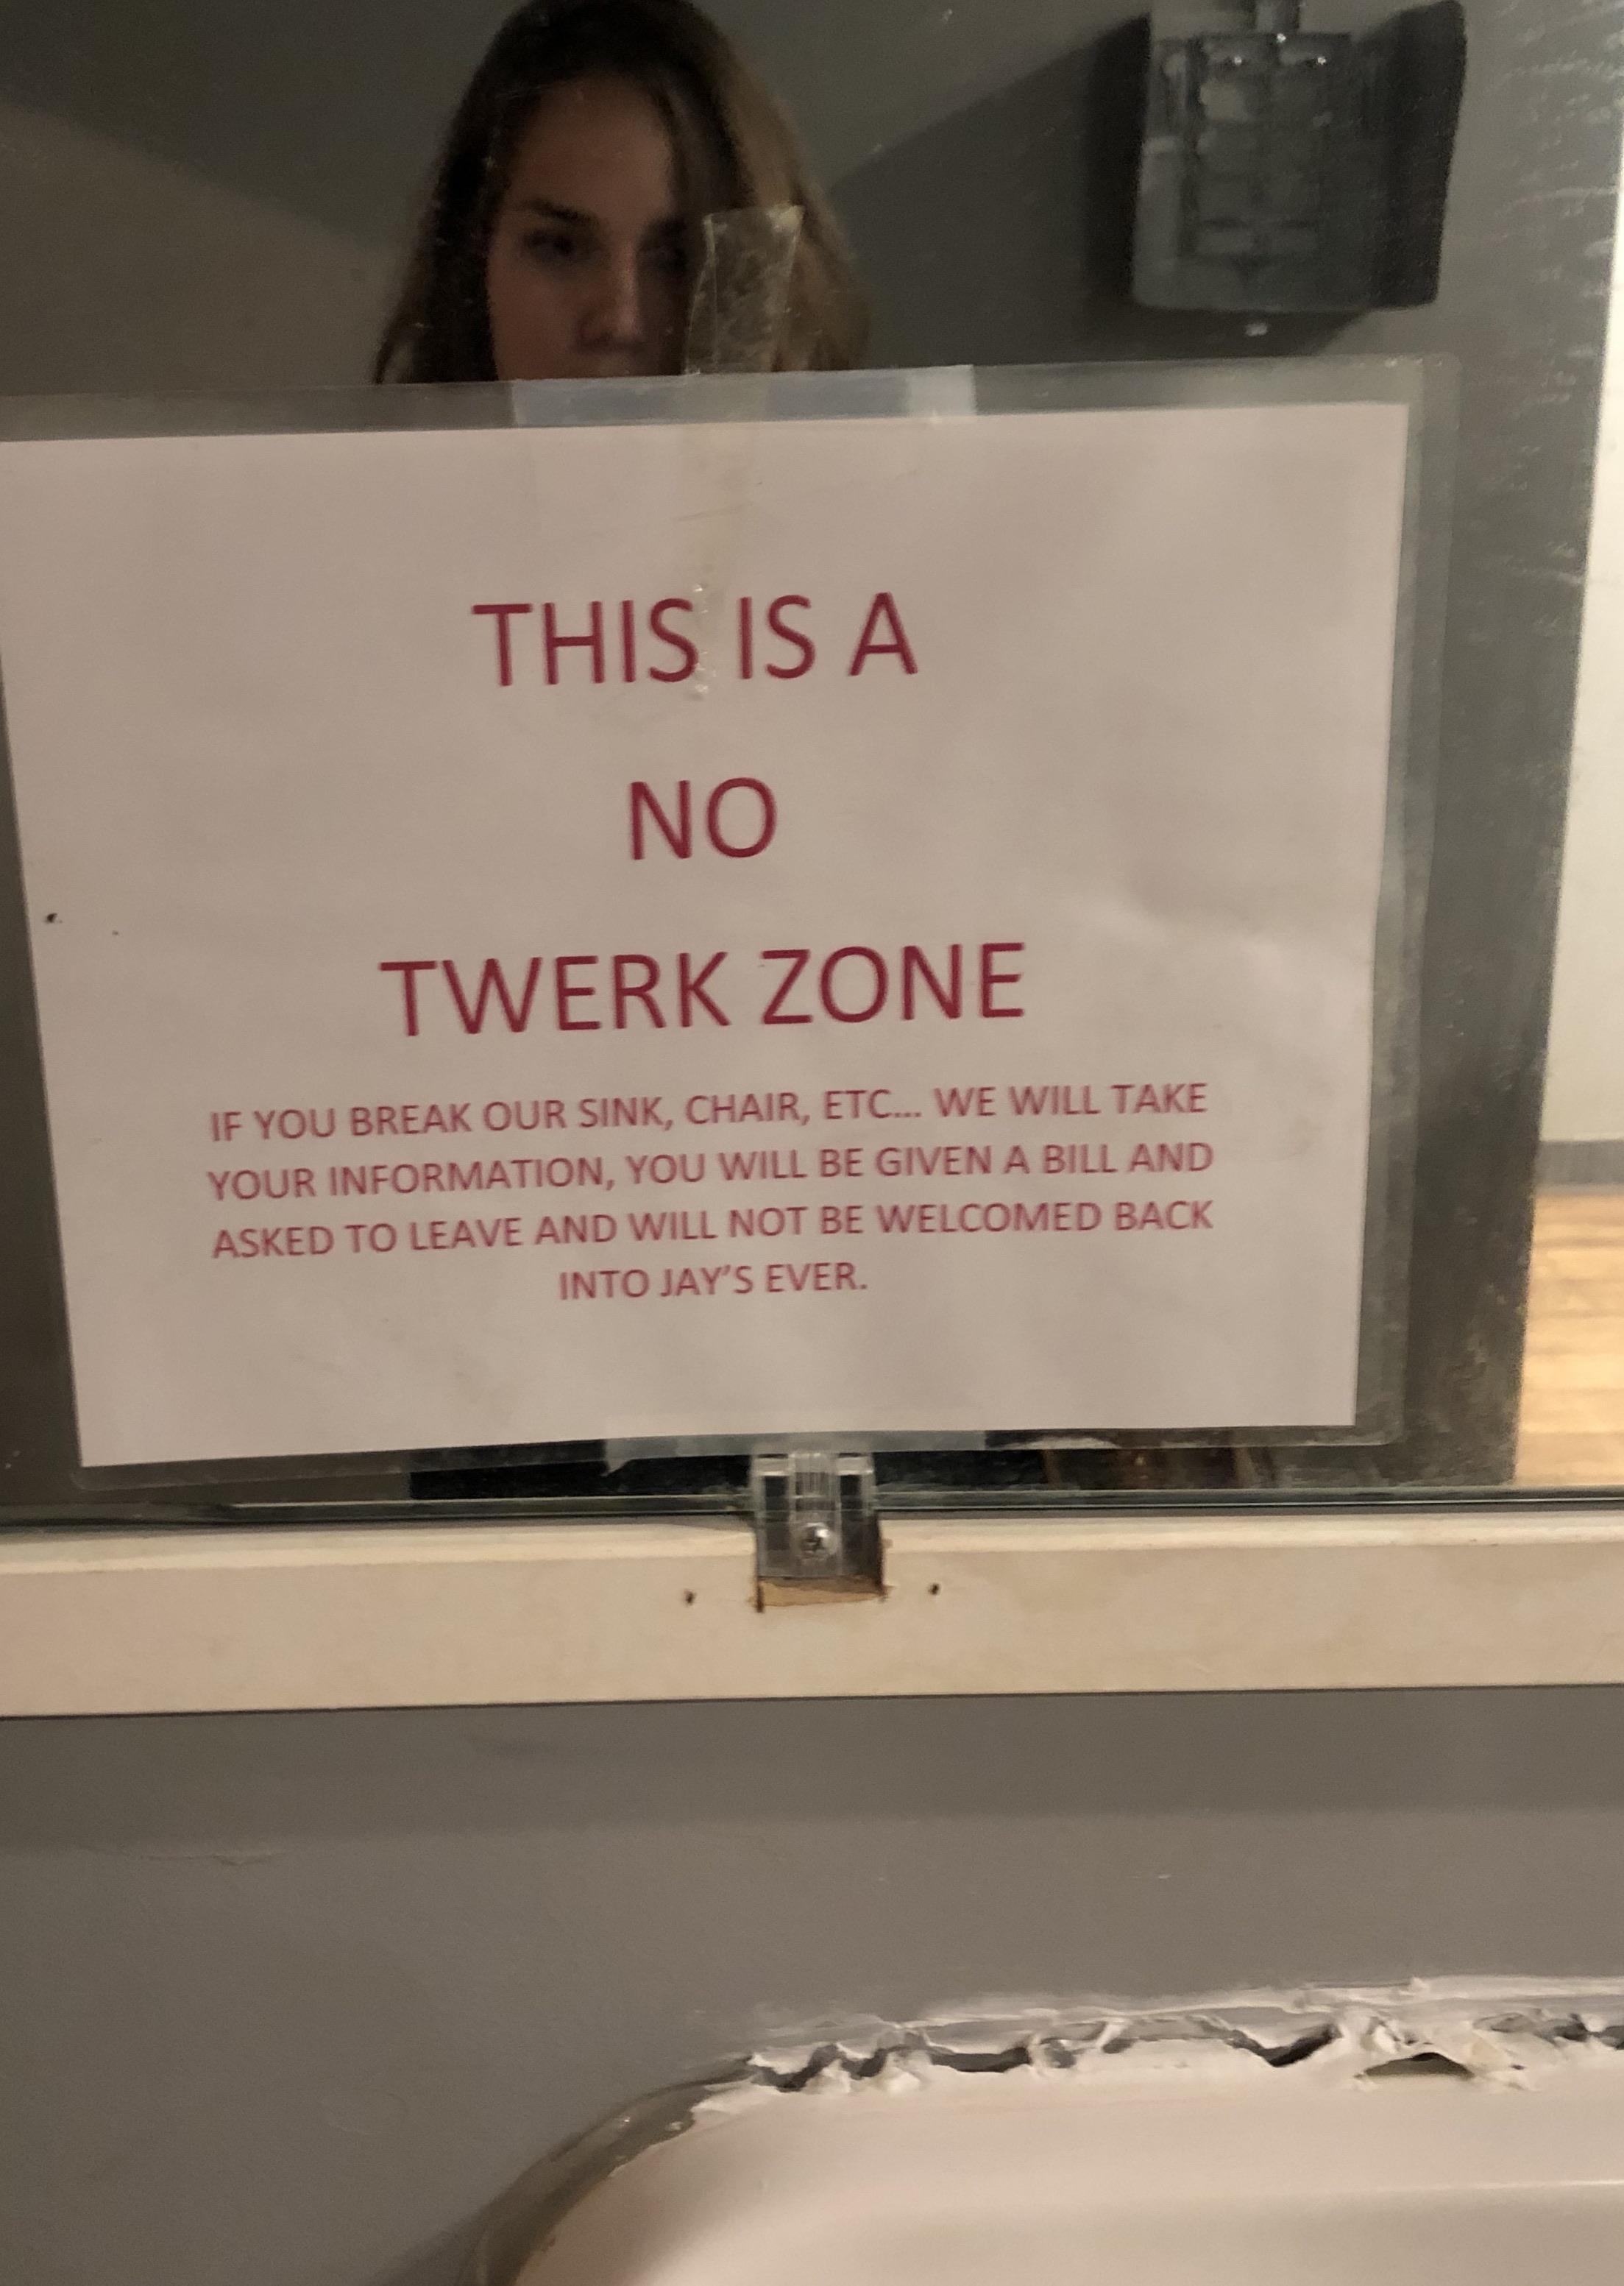 poster - This Is A No Twerk Zone If You Break Our Sink, Chair, Etc... We Will Take Your Information, You Will Be Given A Bill And Asked To Leave And Will Not Be Welcomed Back Into Jay'S Ever.